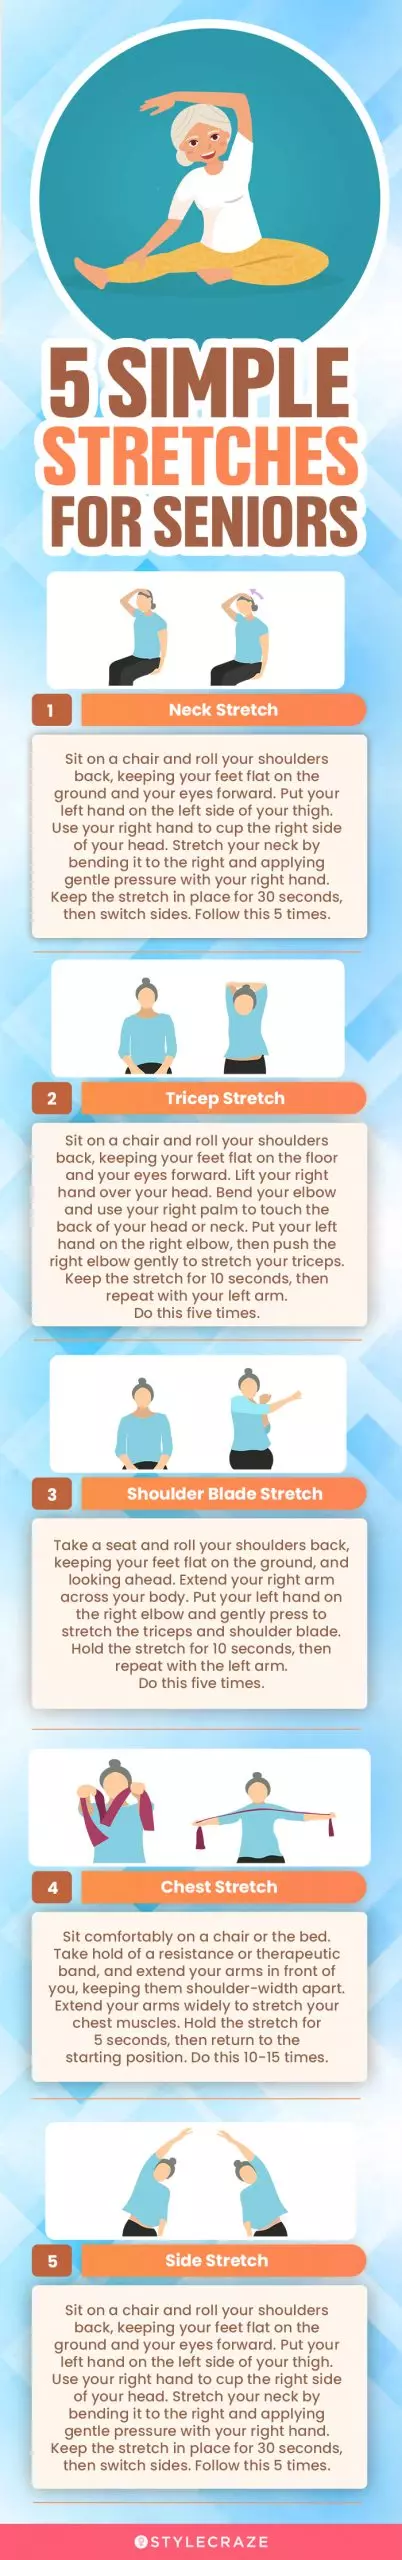 5 simple stretches for seniors (infographic)